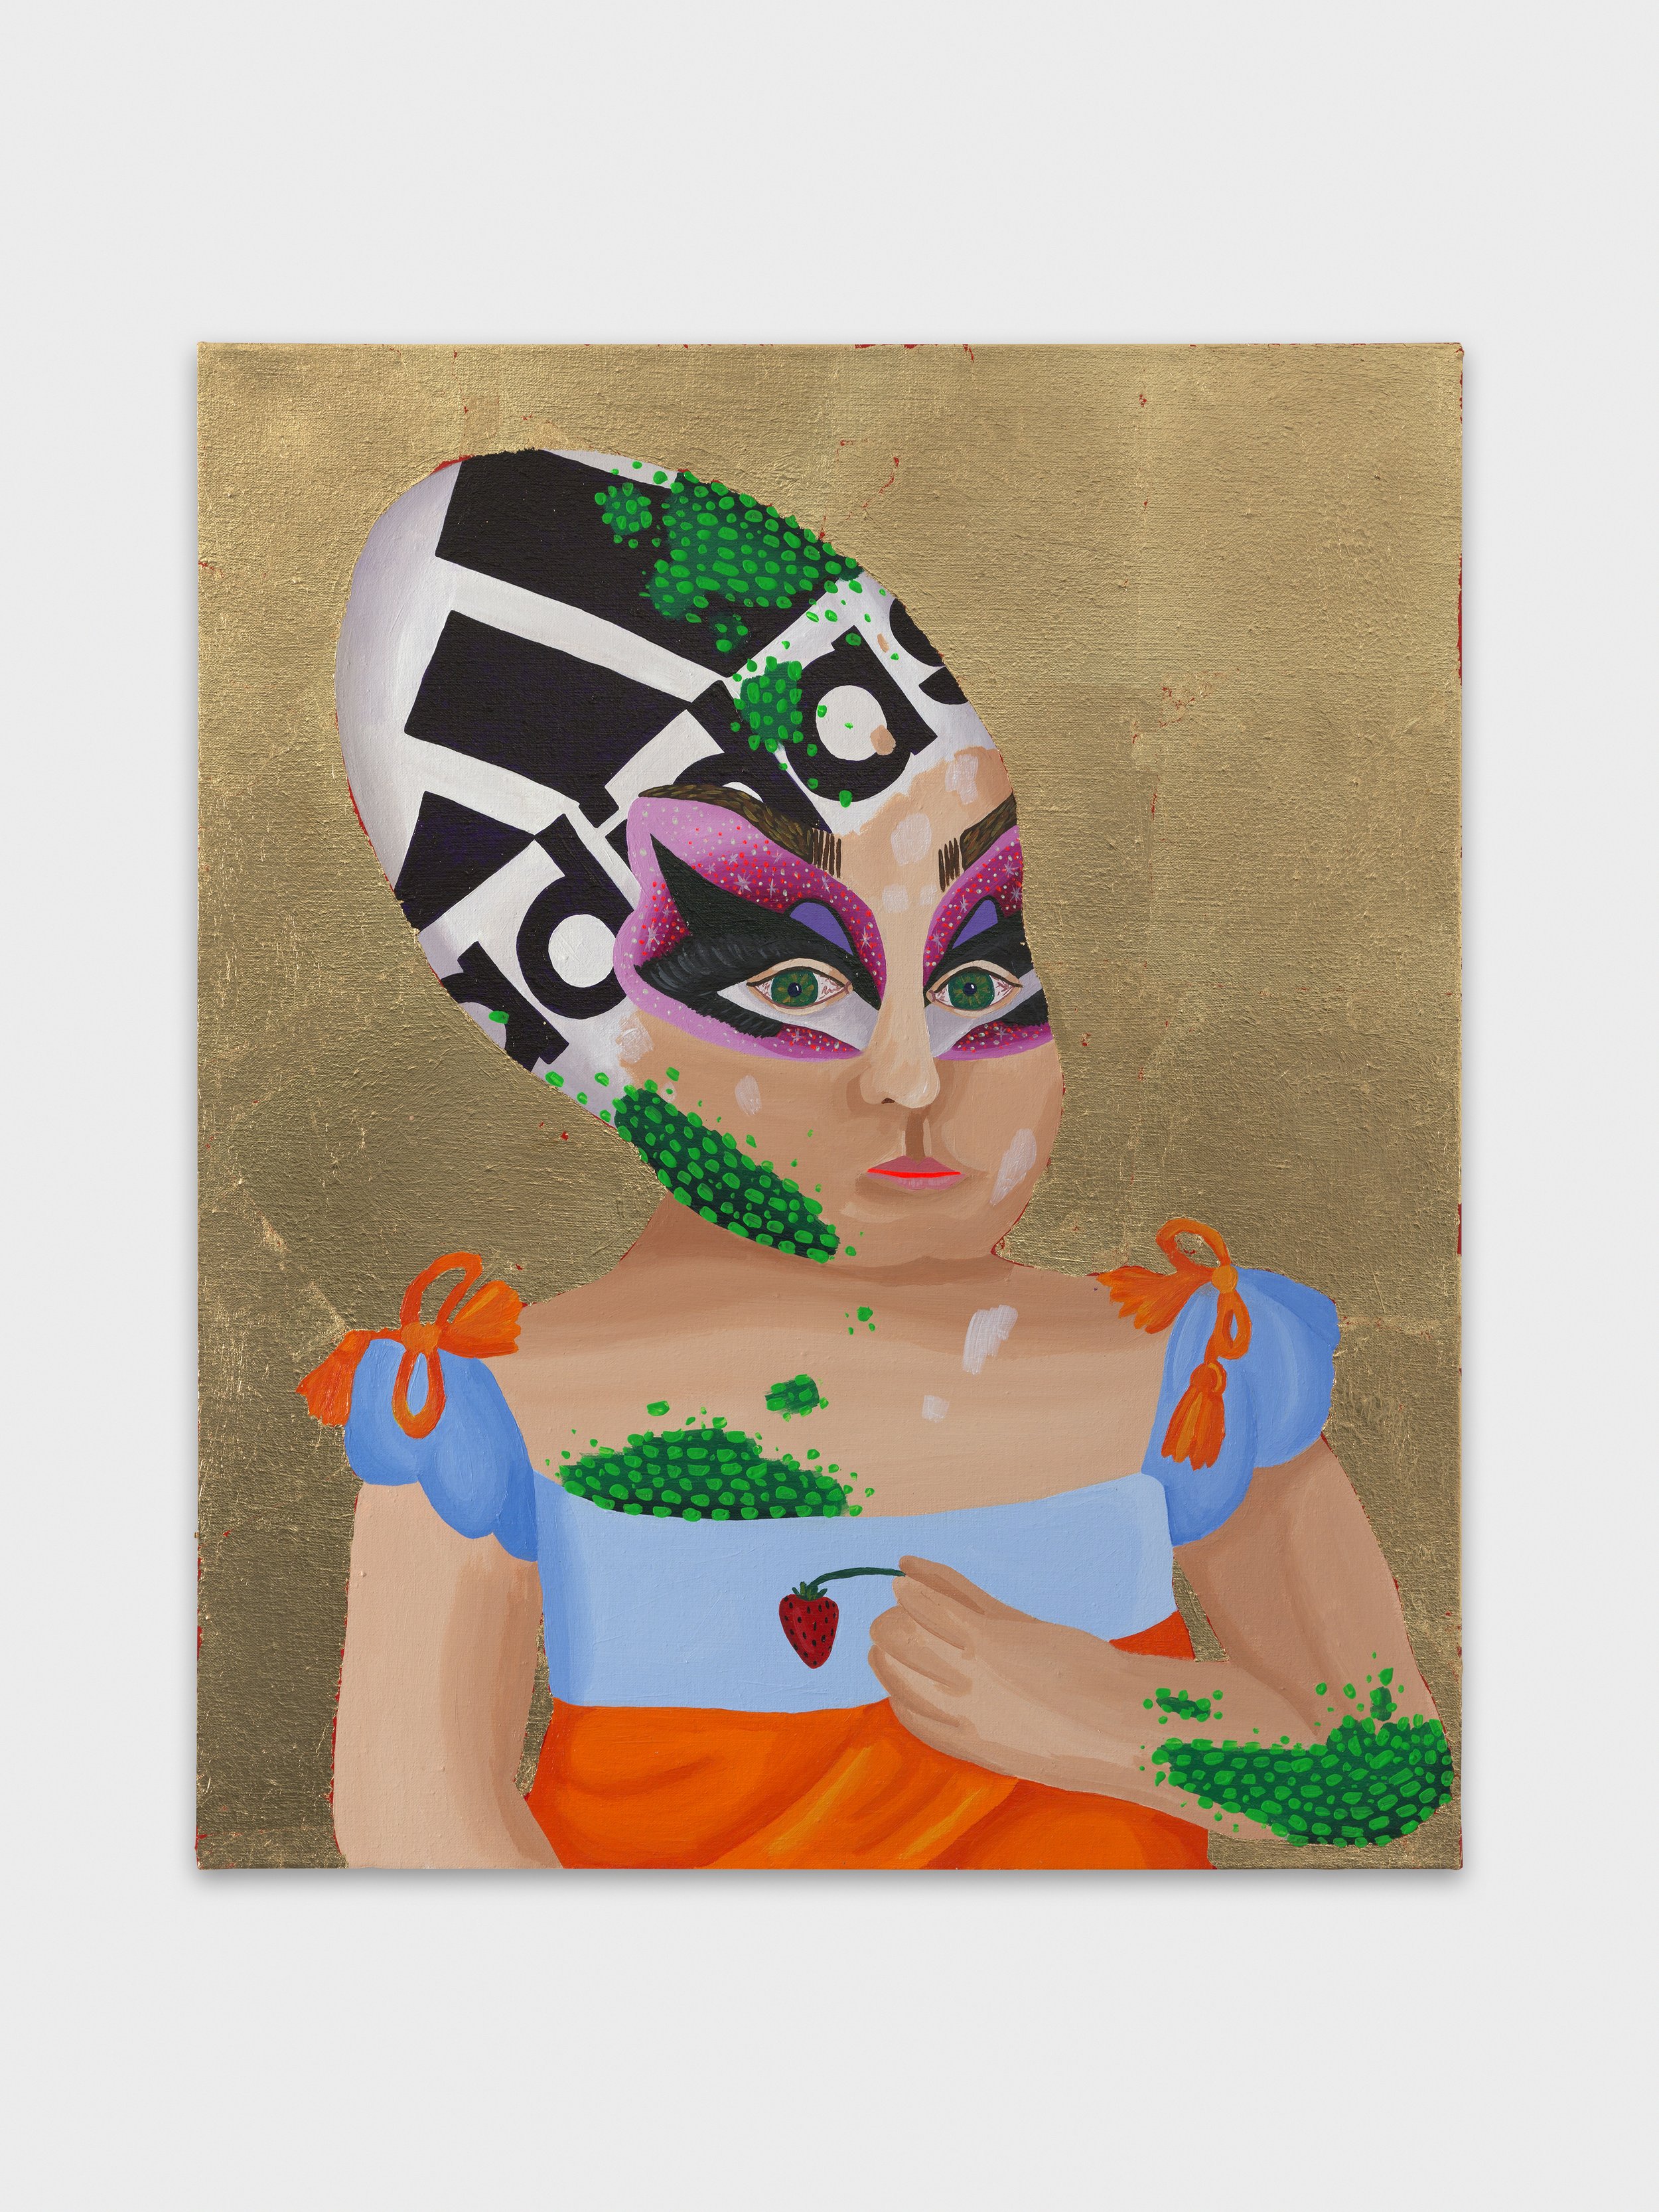   Trixie Mattel Baby with Adidas Face Paint,  2021  24 x 20 inches (60.96 x 50.8)  Acrylic and gold leaf on linen 